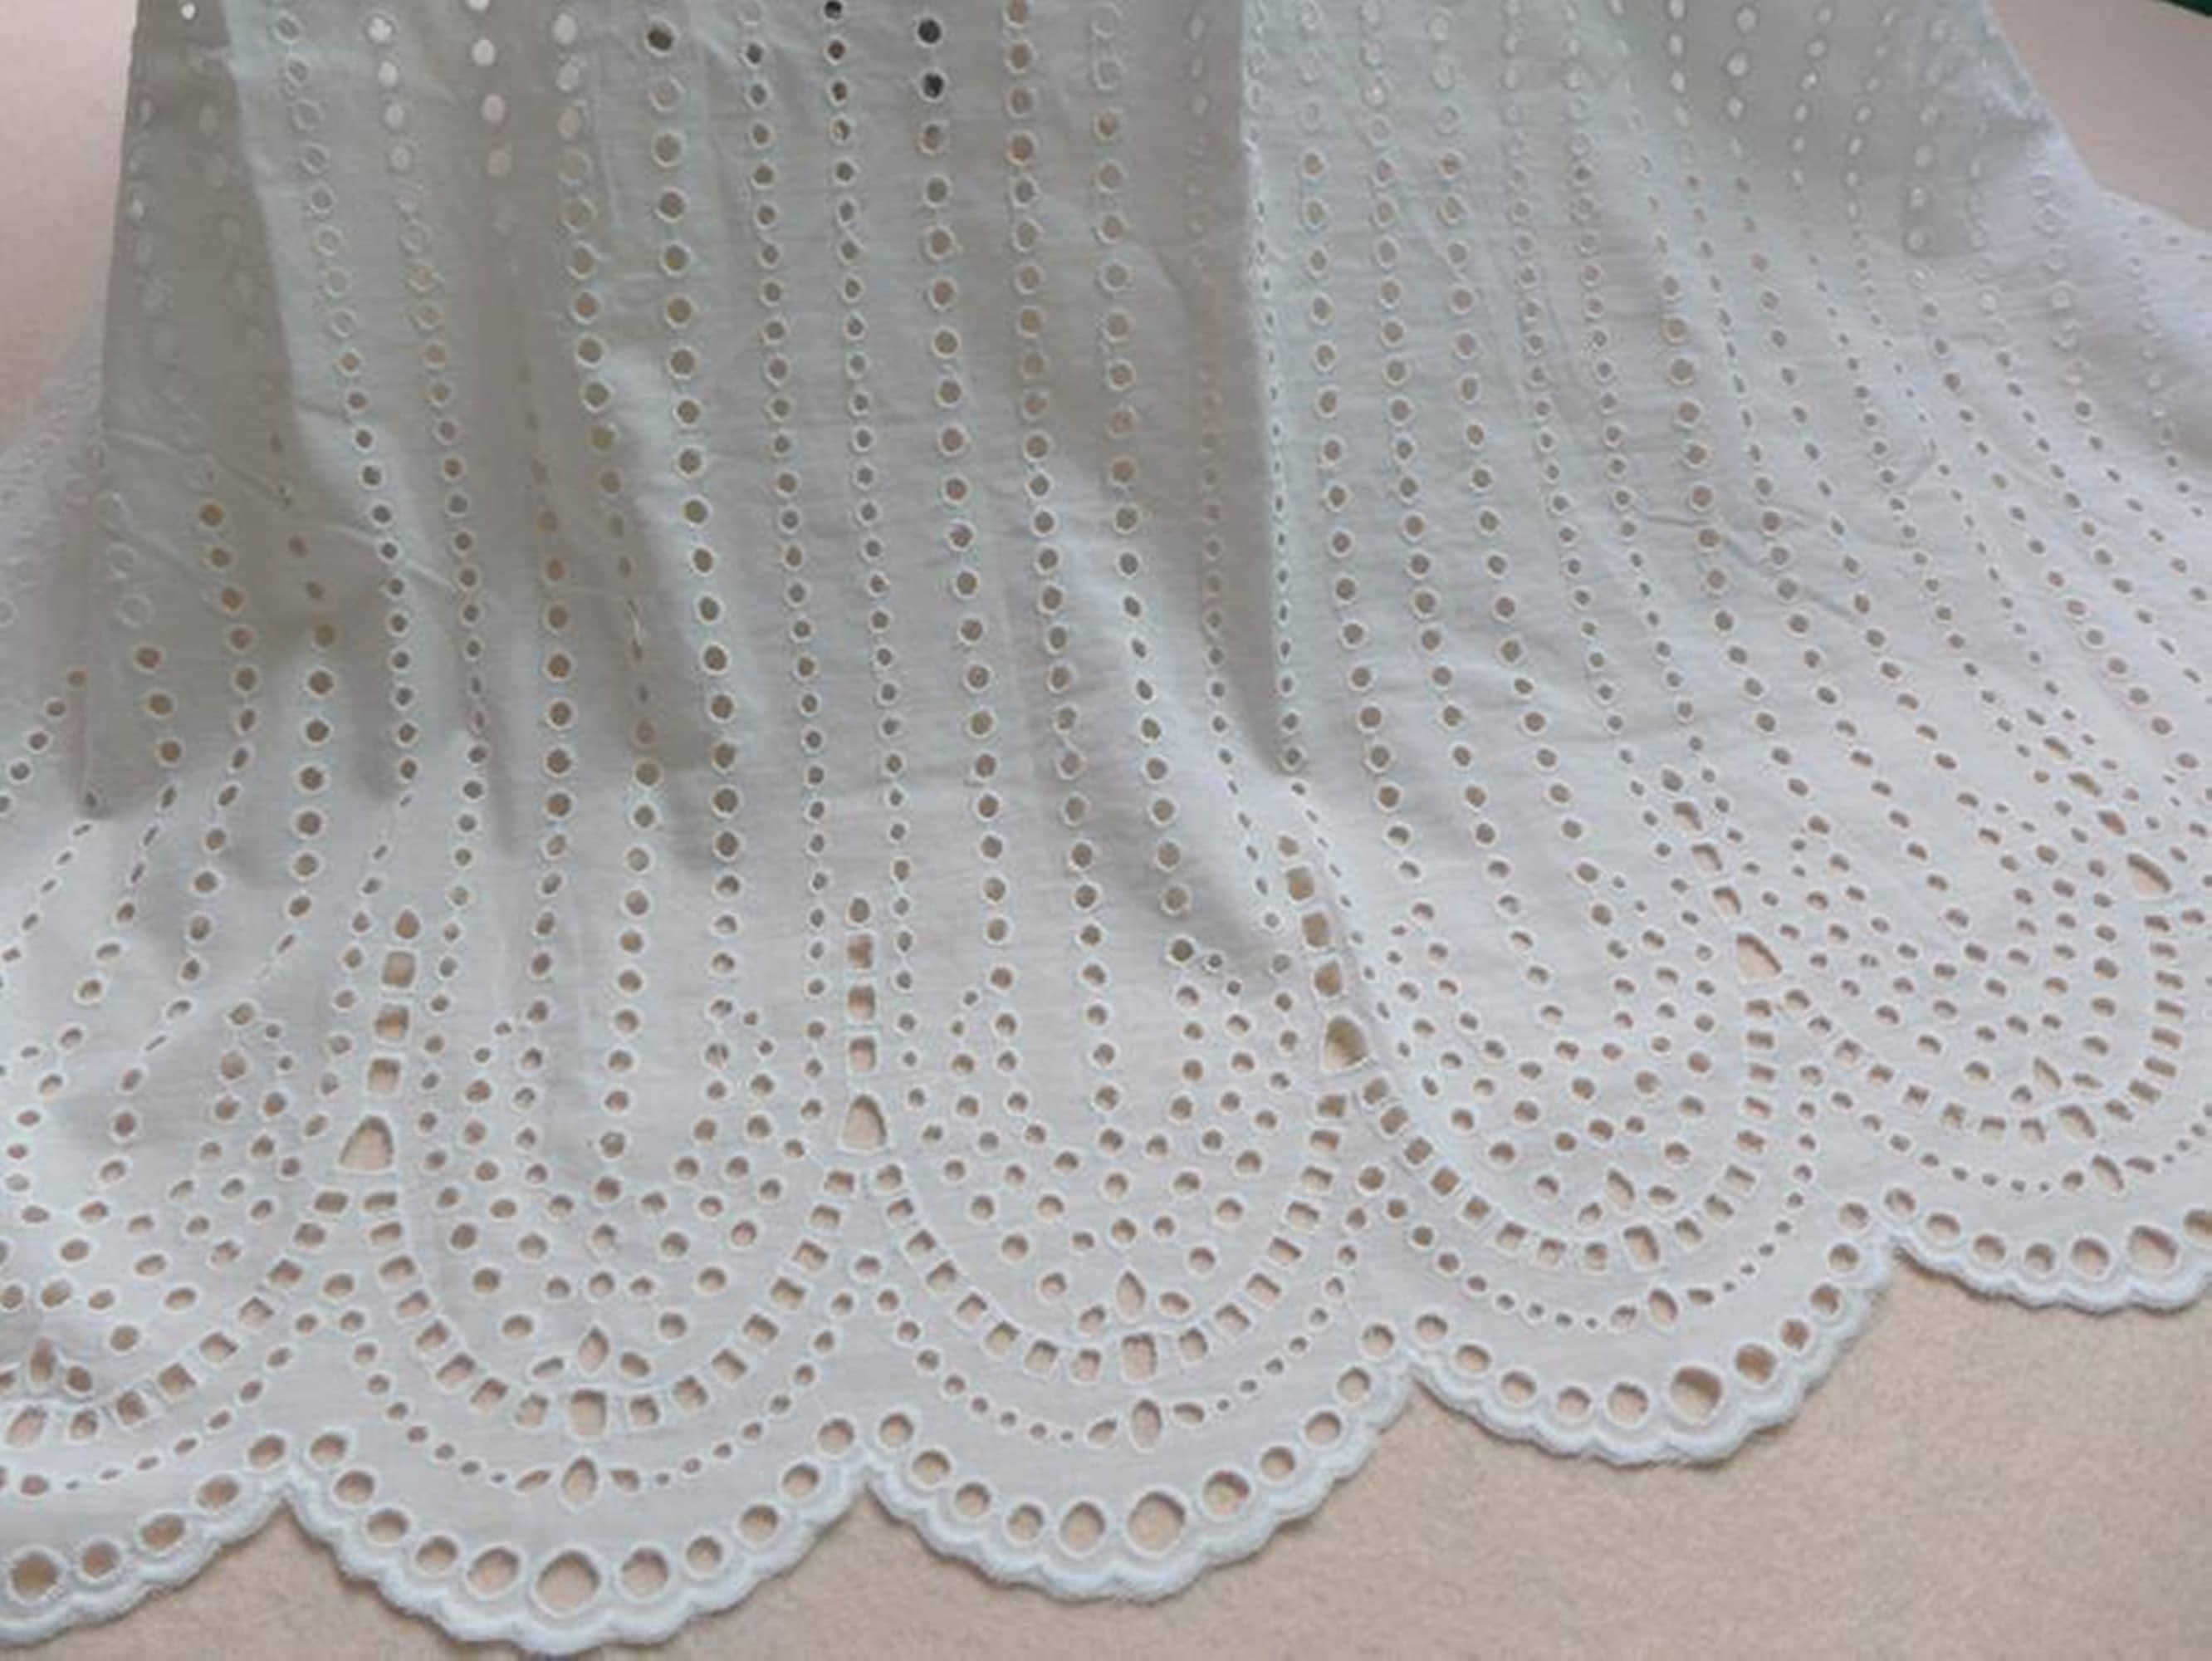 Retro Style Eyelet Cotton Fabric, off White Double Scalloped Edge Cotton  Lace Fabric for Dress, Coat, Jacket, Sewing Supply 